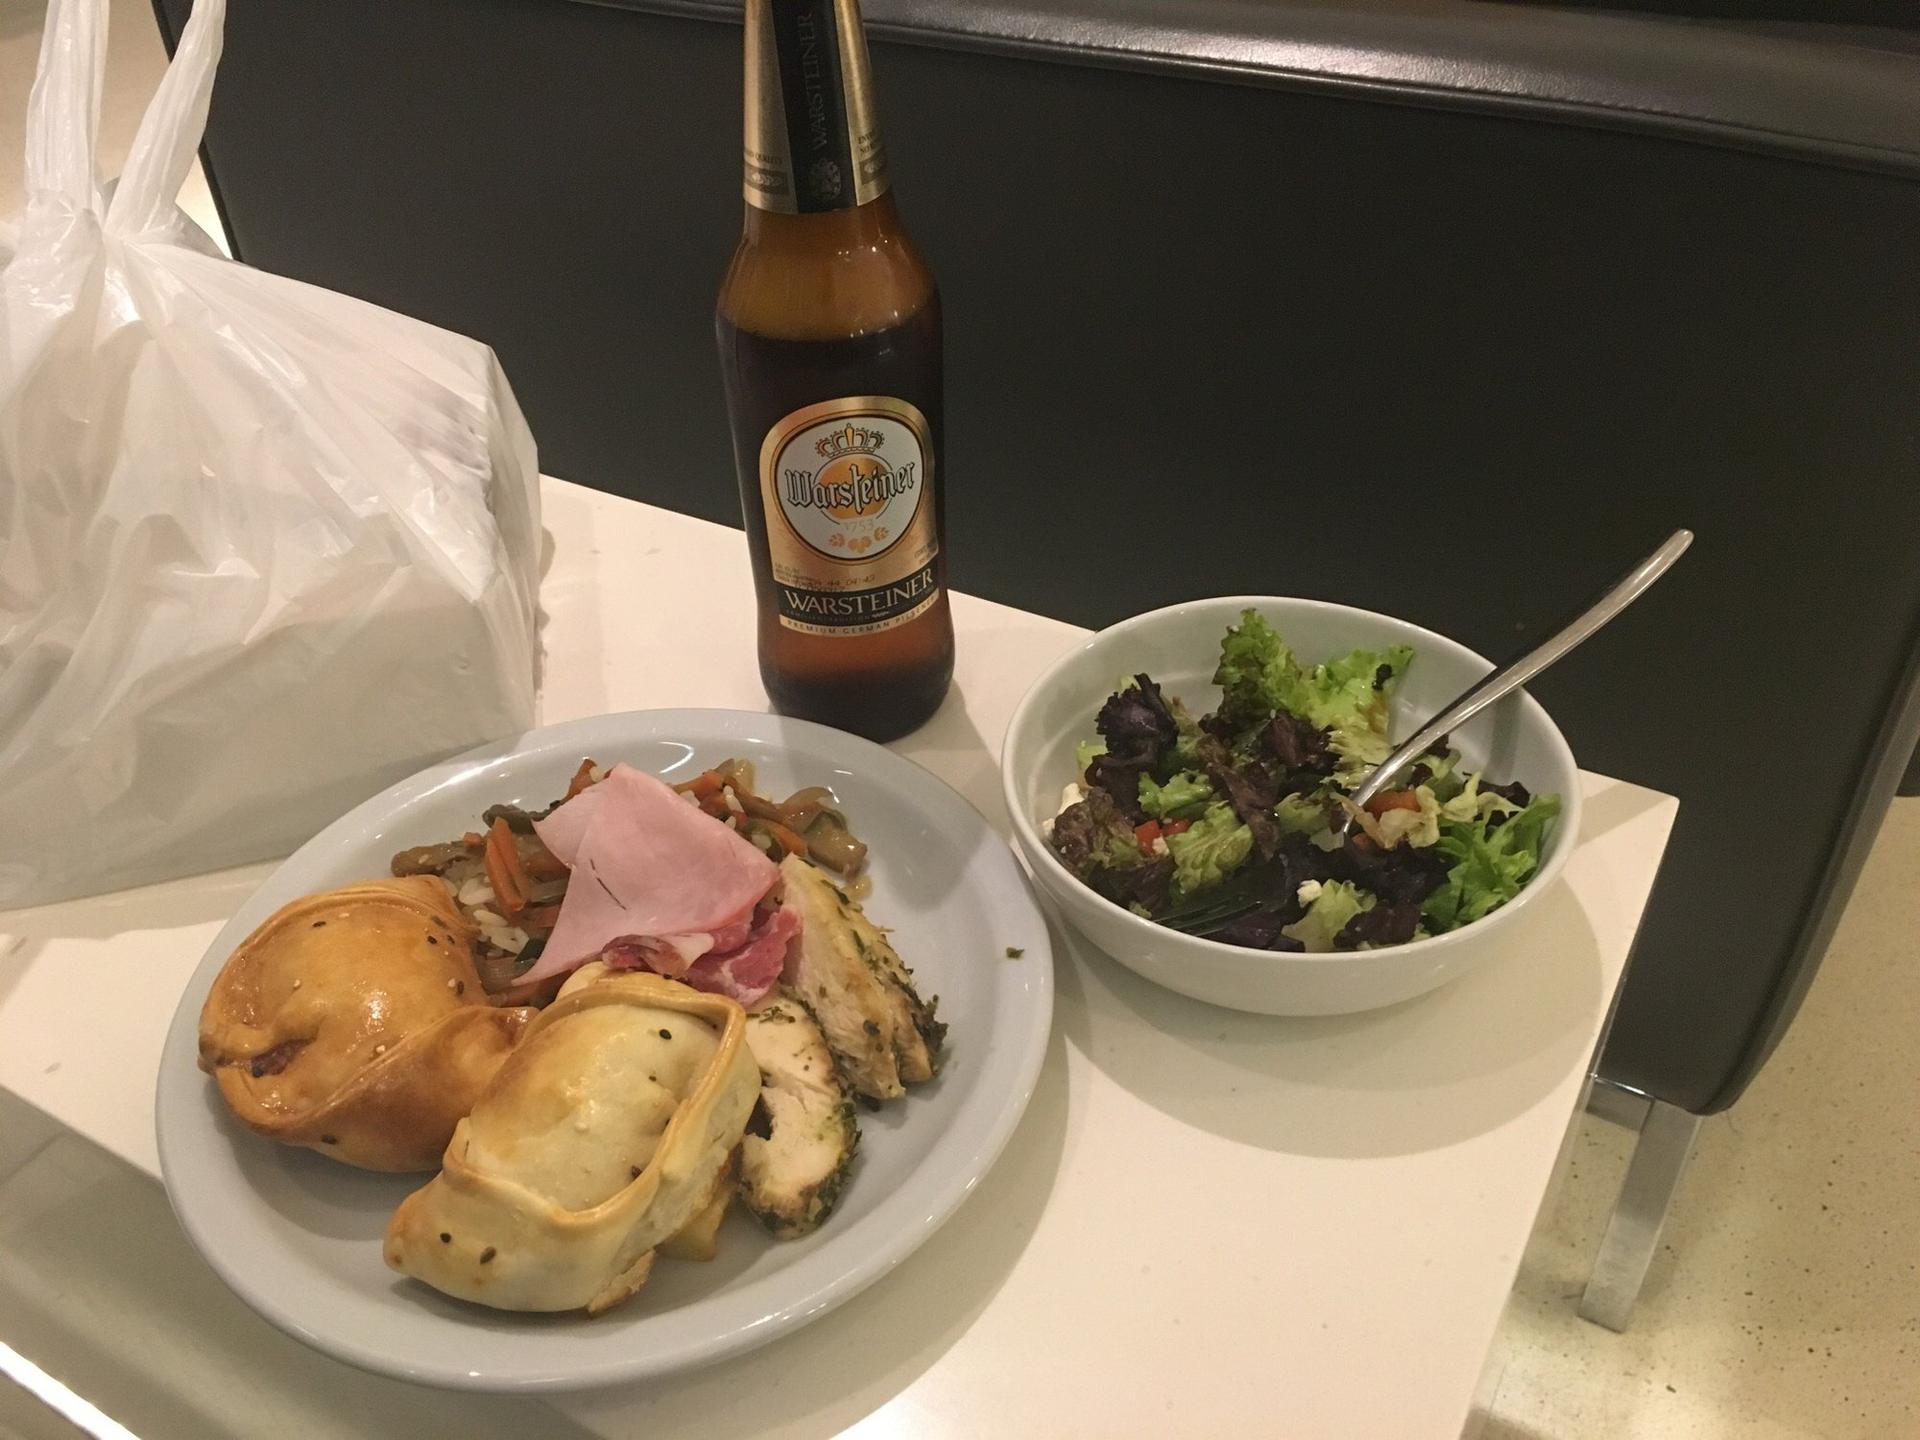 American Airlines Admirals Club & Iberia VIP Lounge image 9 of 18